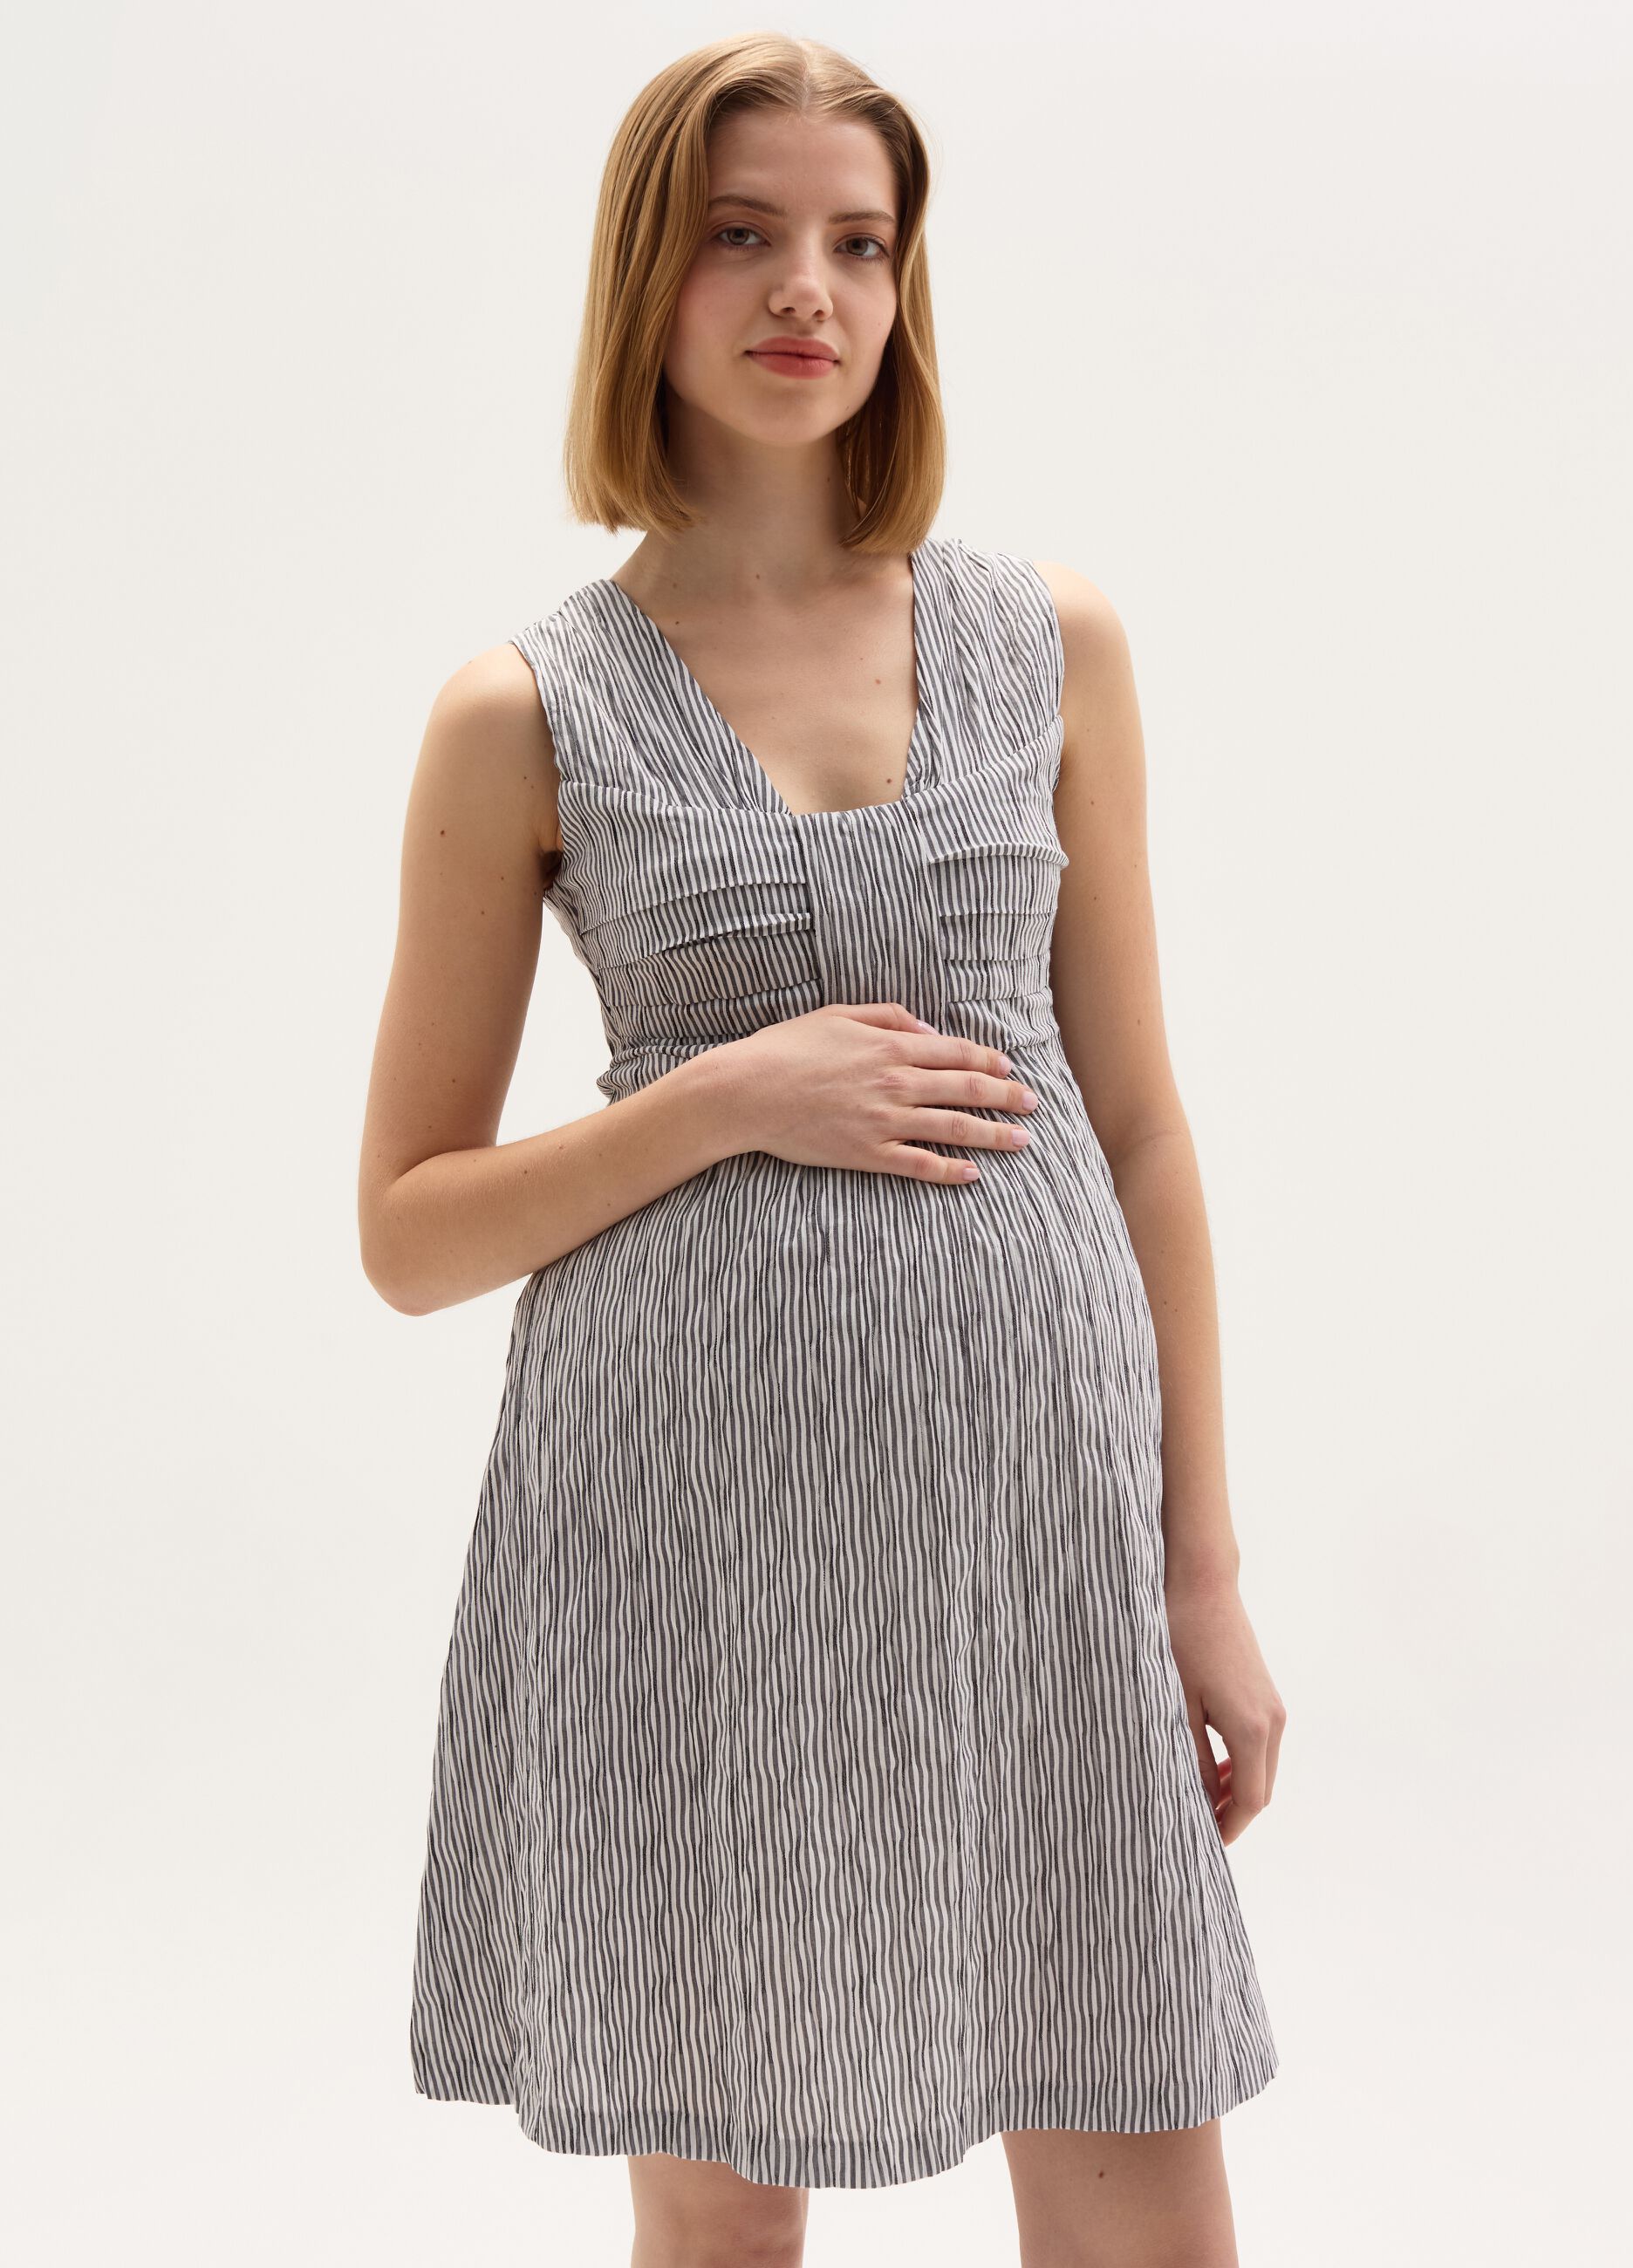 Maternity dress with thin stripes